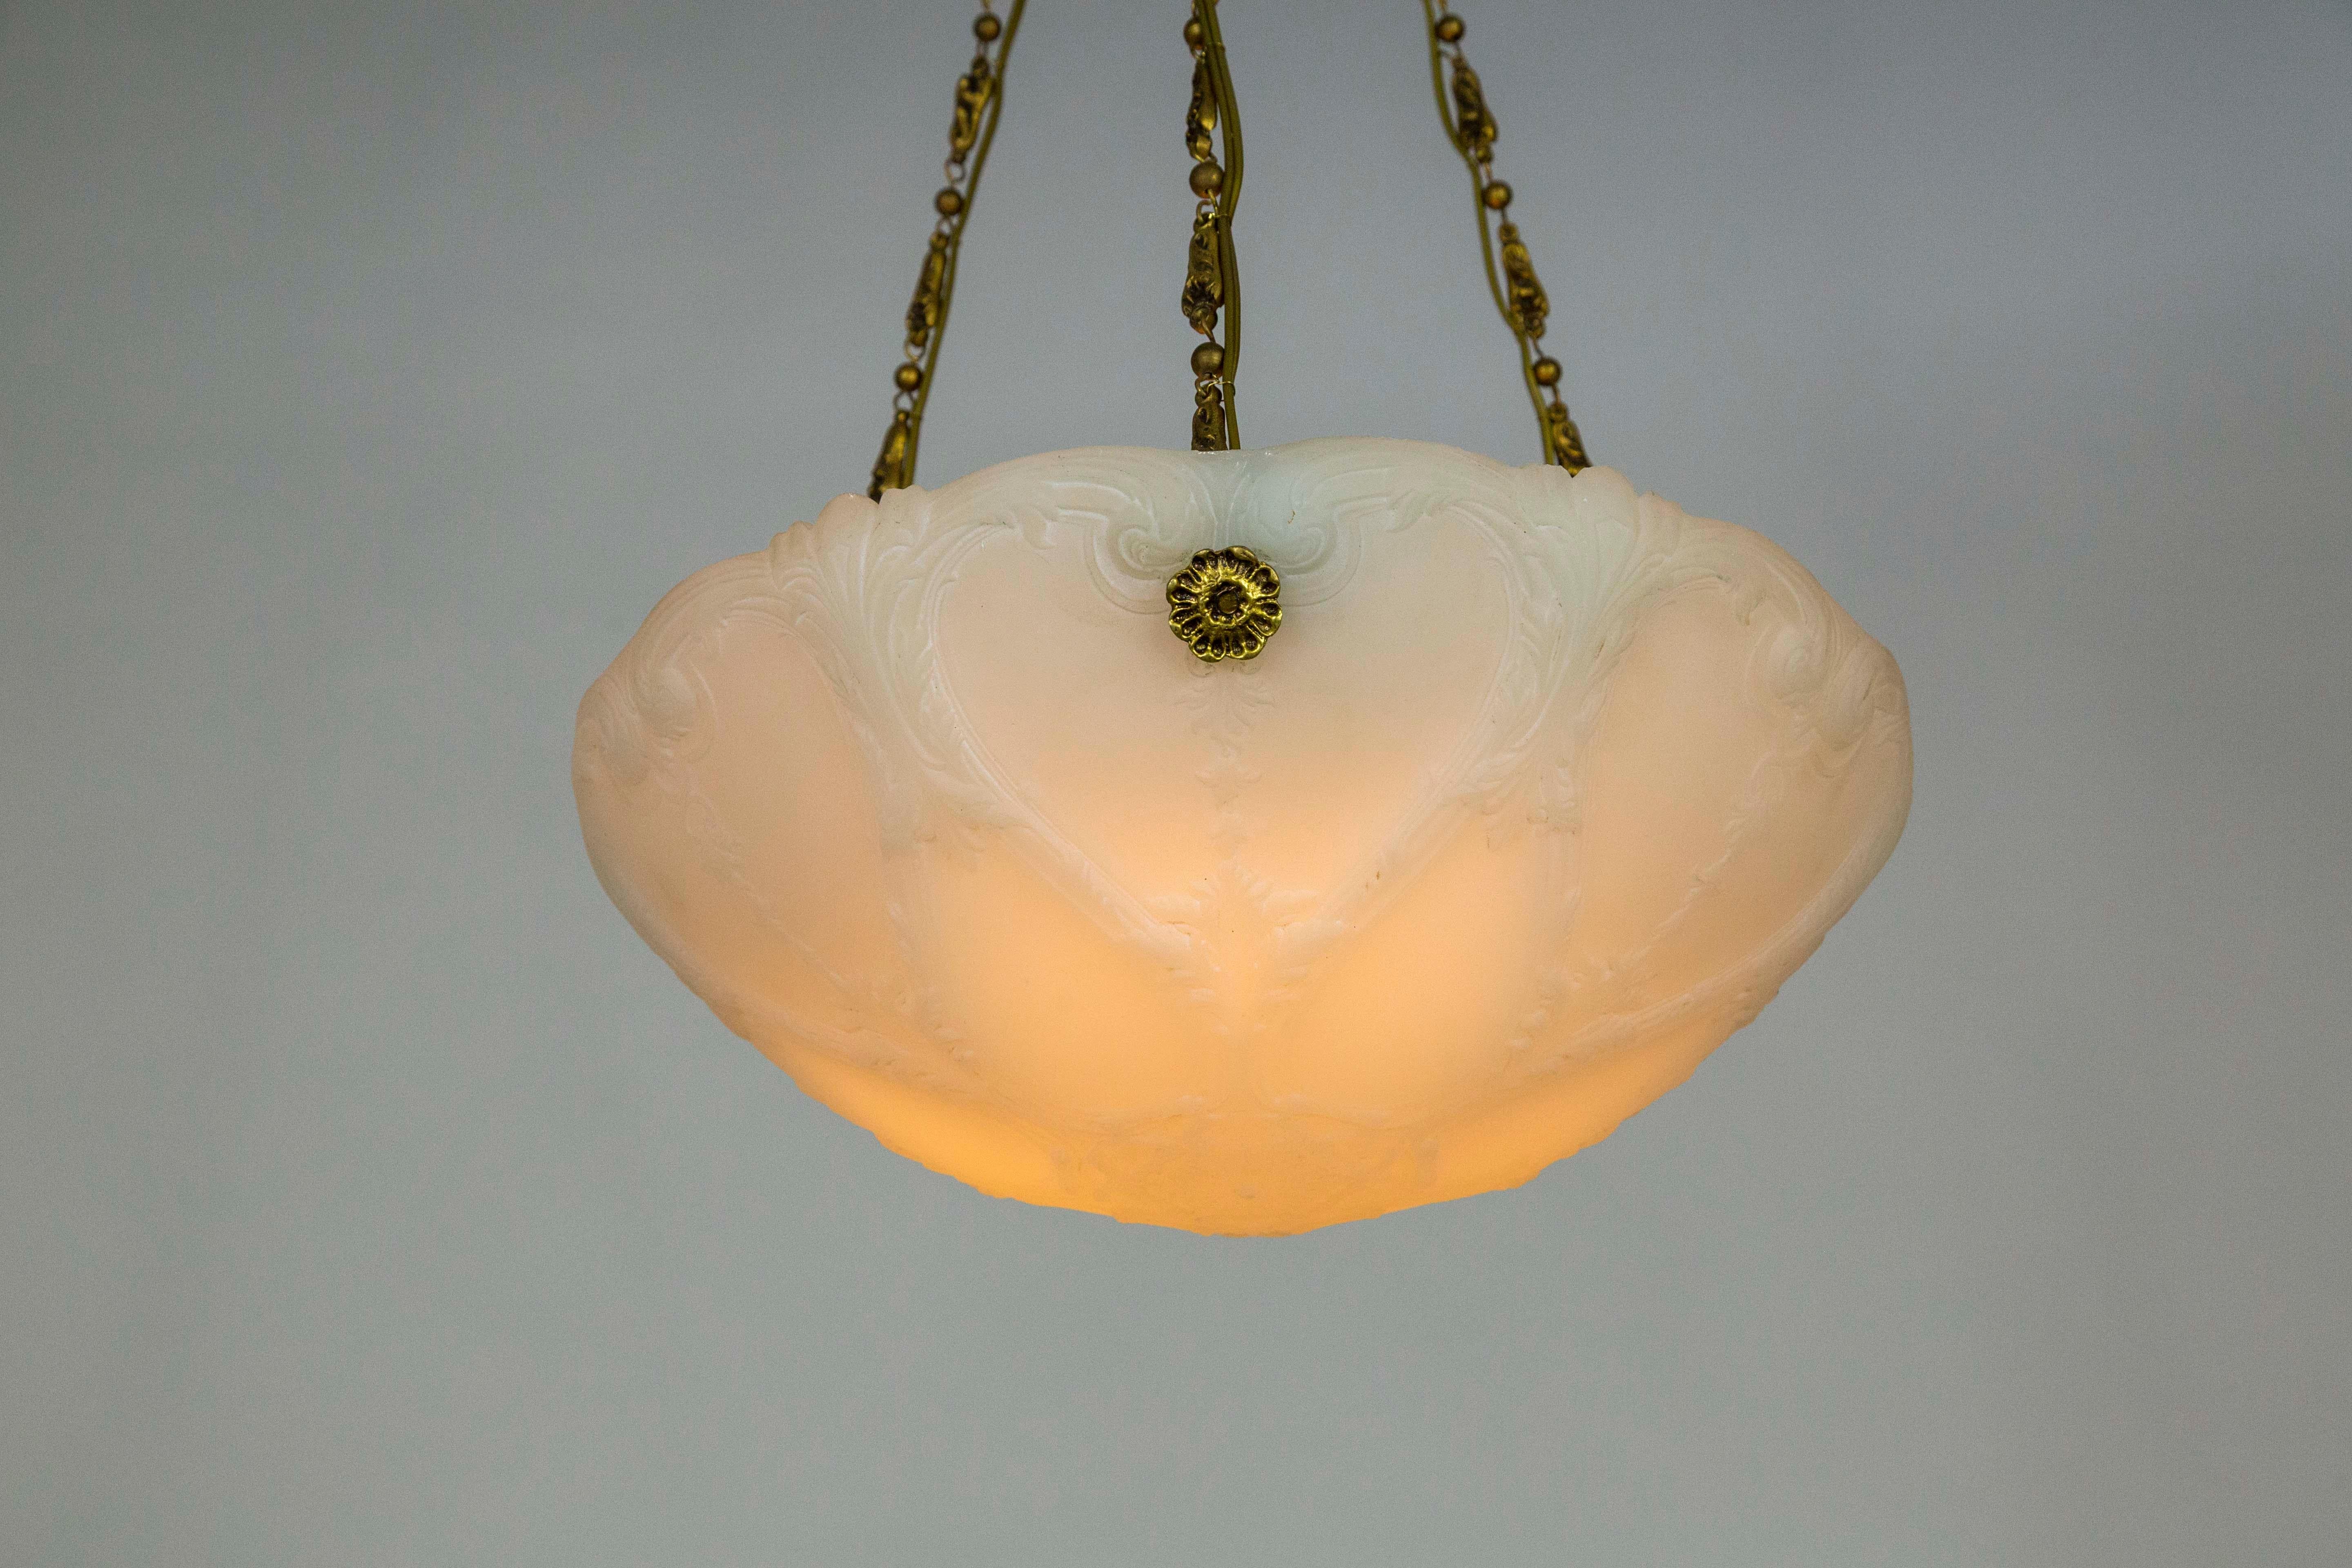 Early 1900s Neoclassical Detailed Milk Glass Bowl Pendant Light W/ Unique Chain For Sale 5